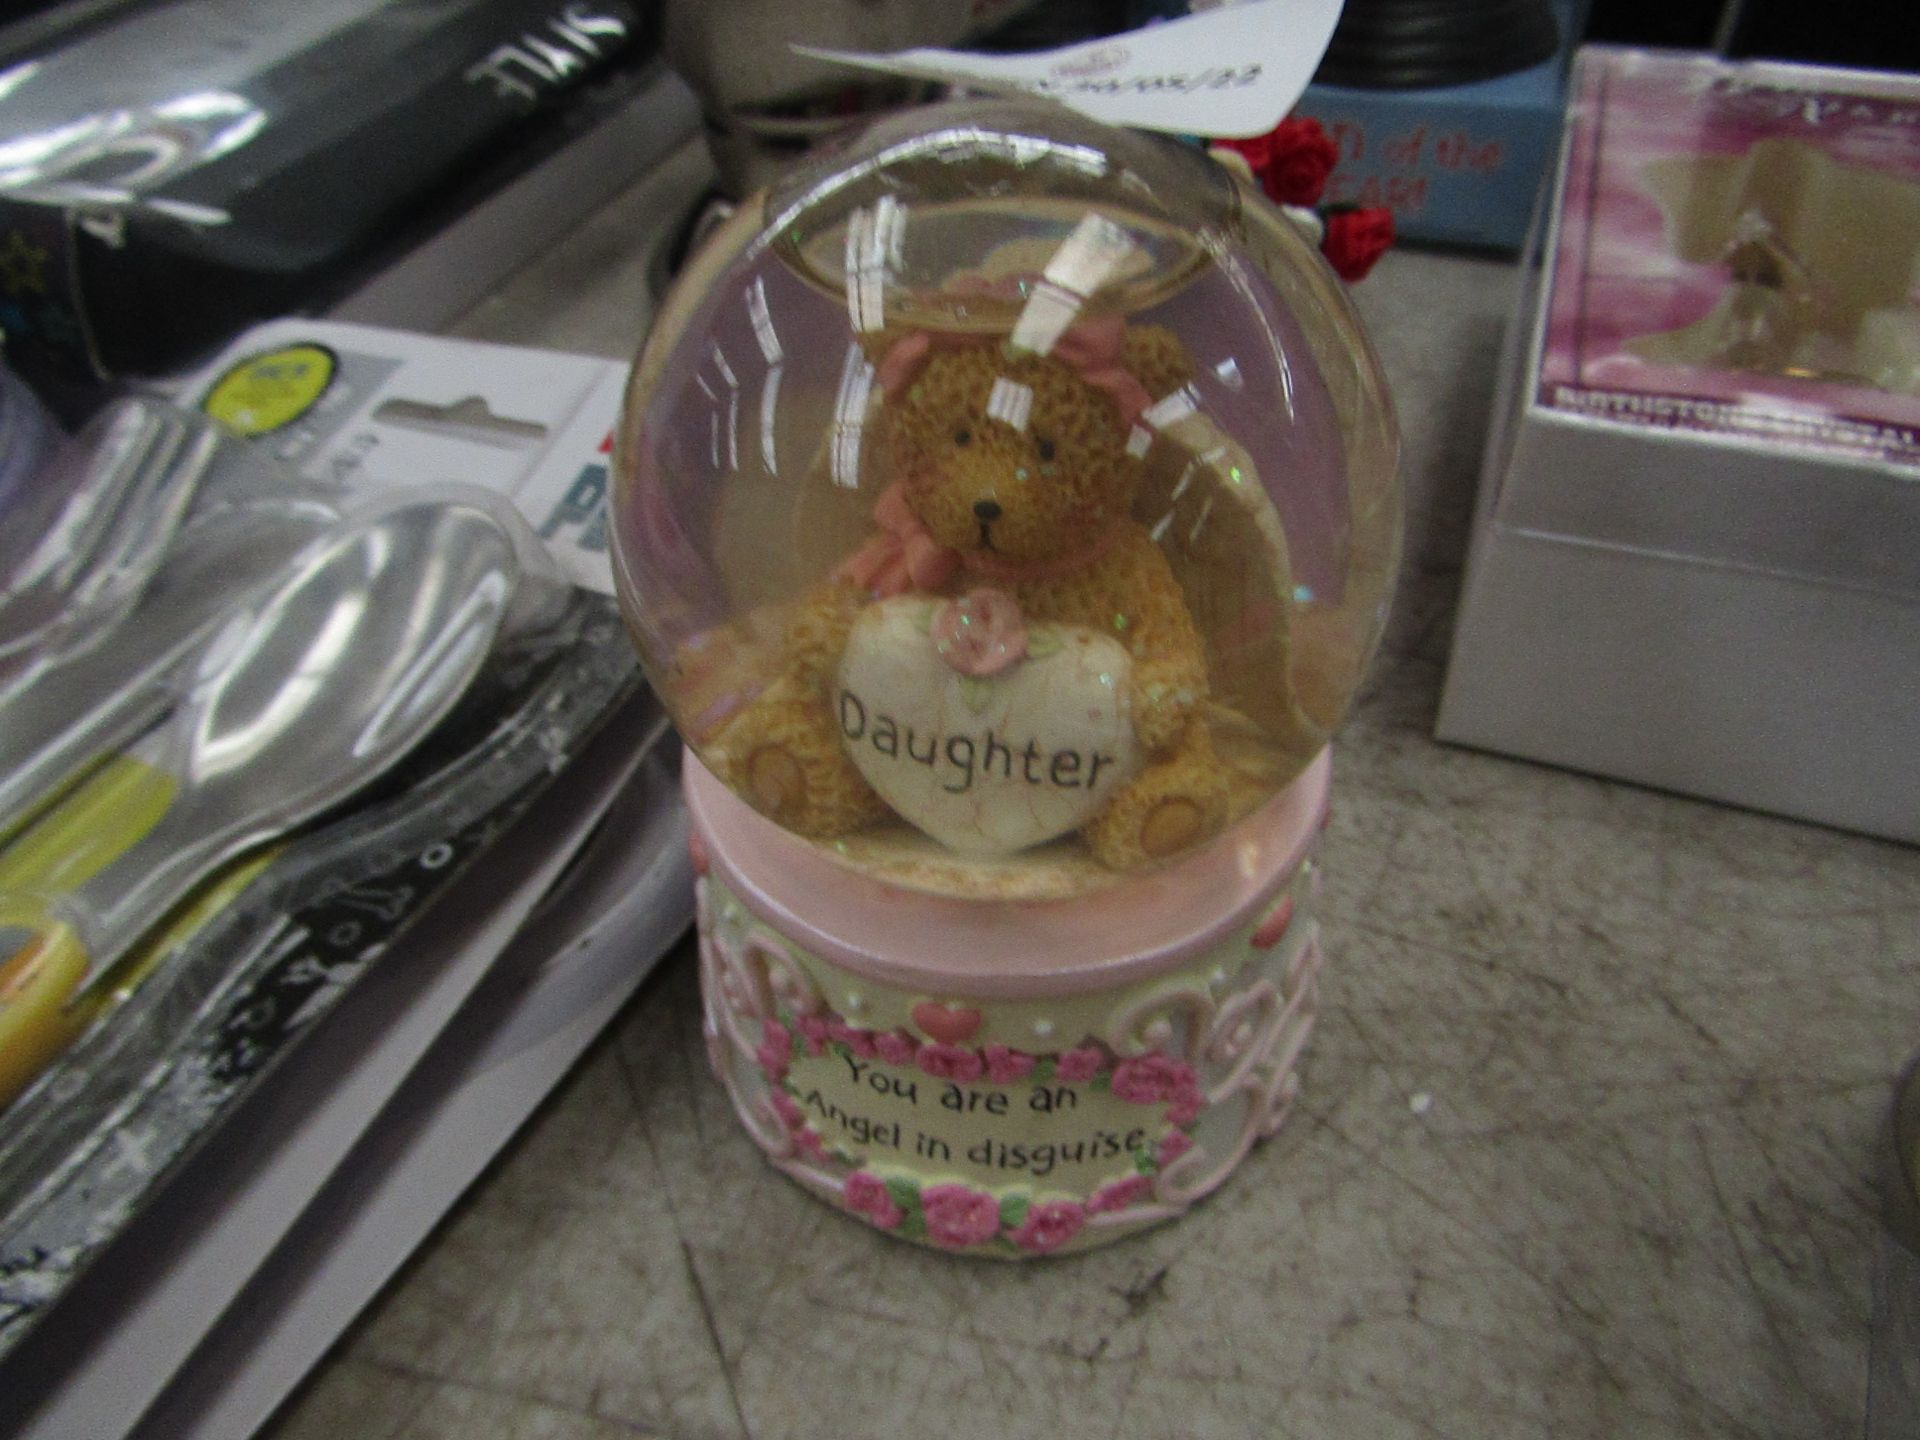 1x "Daughter" Snow Globe - No Box. 3x Various Occasion Gifts - See Image For Designs.